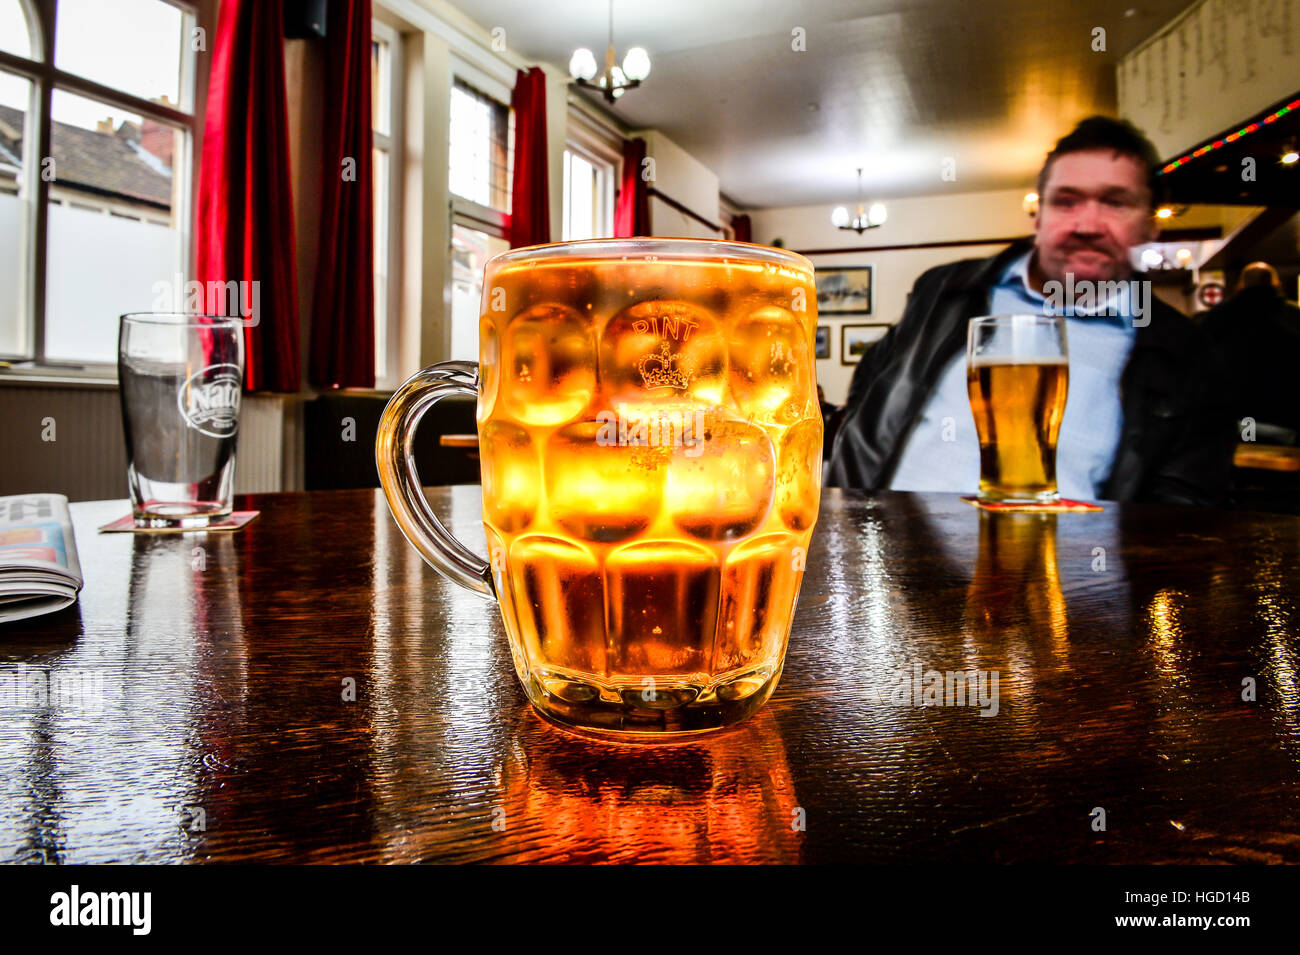 A dimpled pint glass etched with the Crown stamp rather than the European CE marking, as Ukip MEP Bill Etheridge has backed calls for the return of traditional Crown stamps on Britain&Otilde;s pint glasses - a decade after they began to disappear in favour of an EU-wide &Ograve;European Conformity&Oacute; mark. Stock Photo